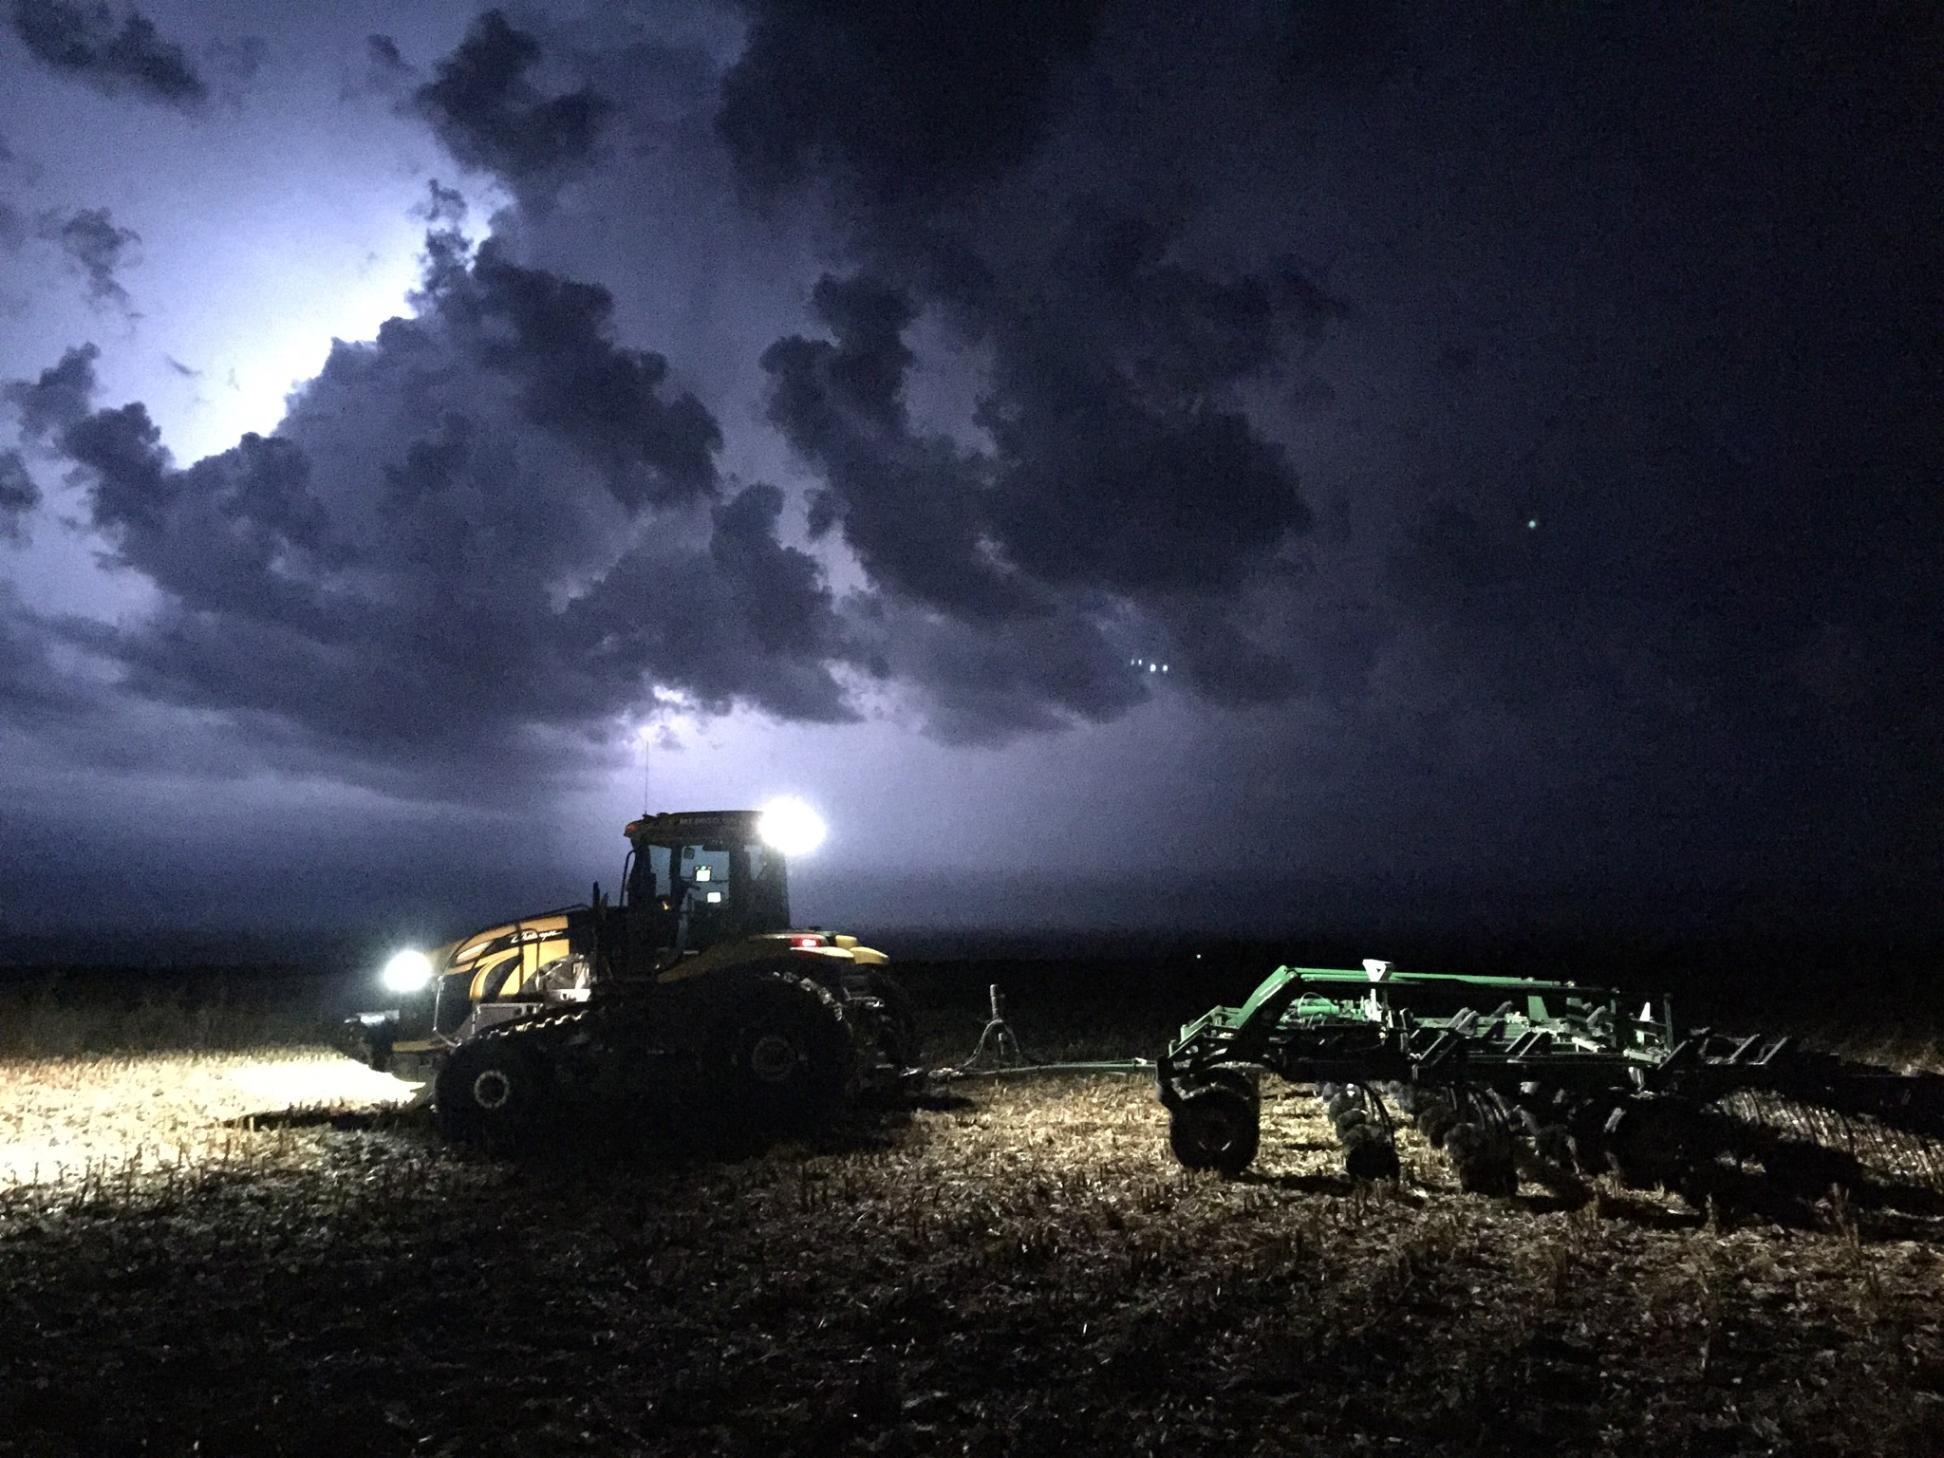 Tractor in Field at Night